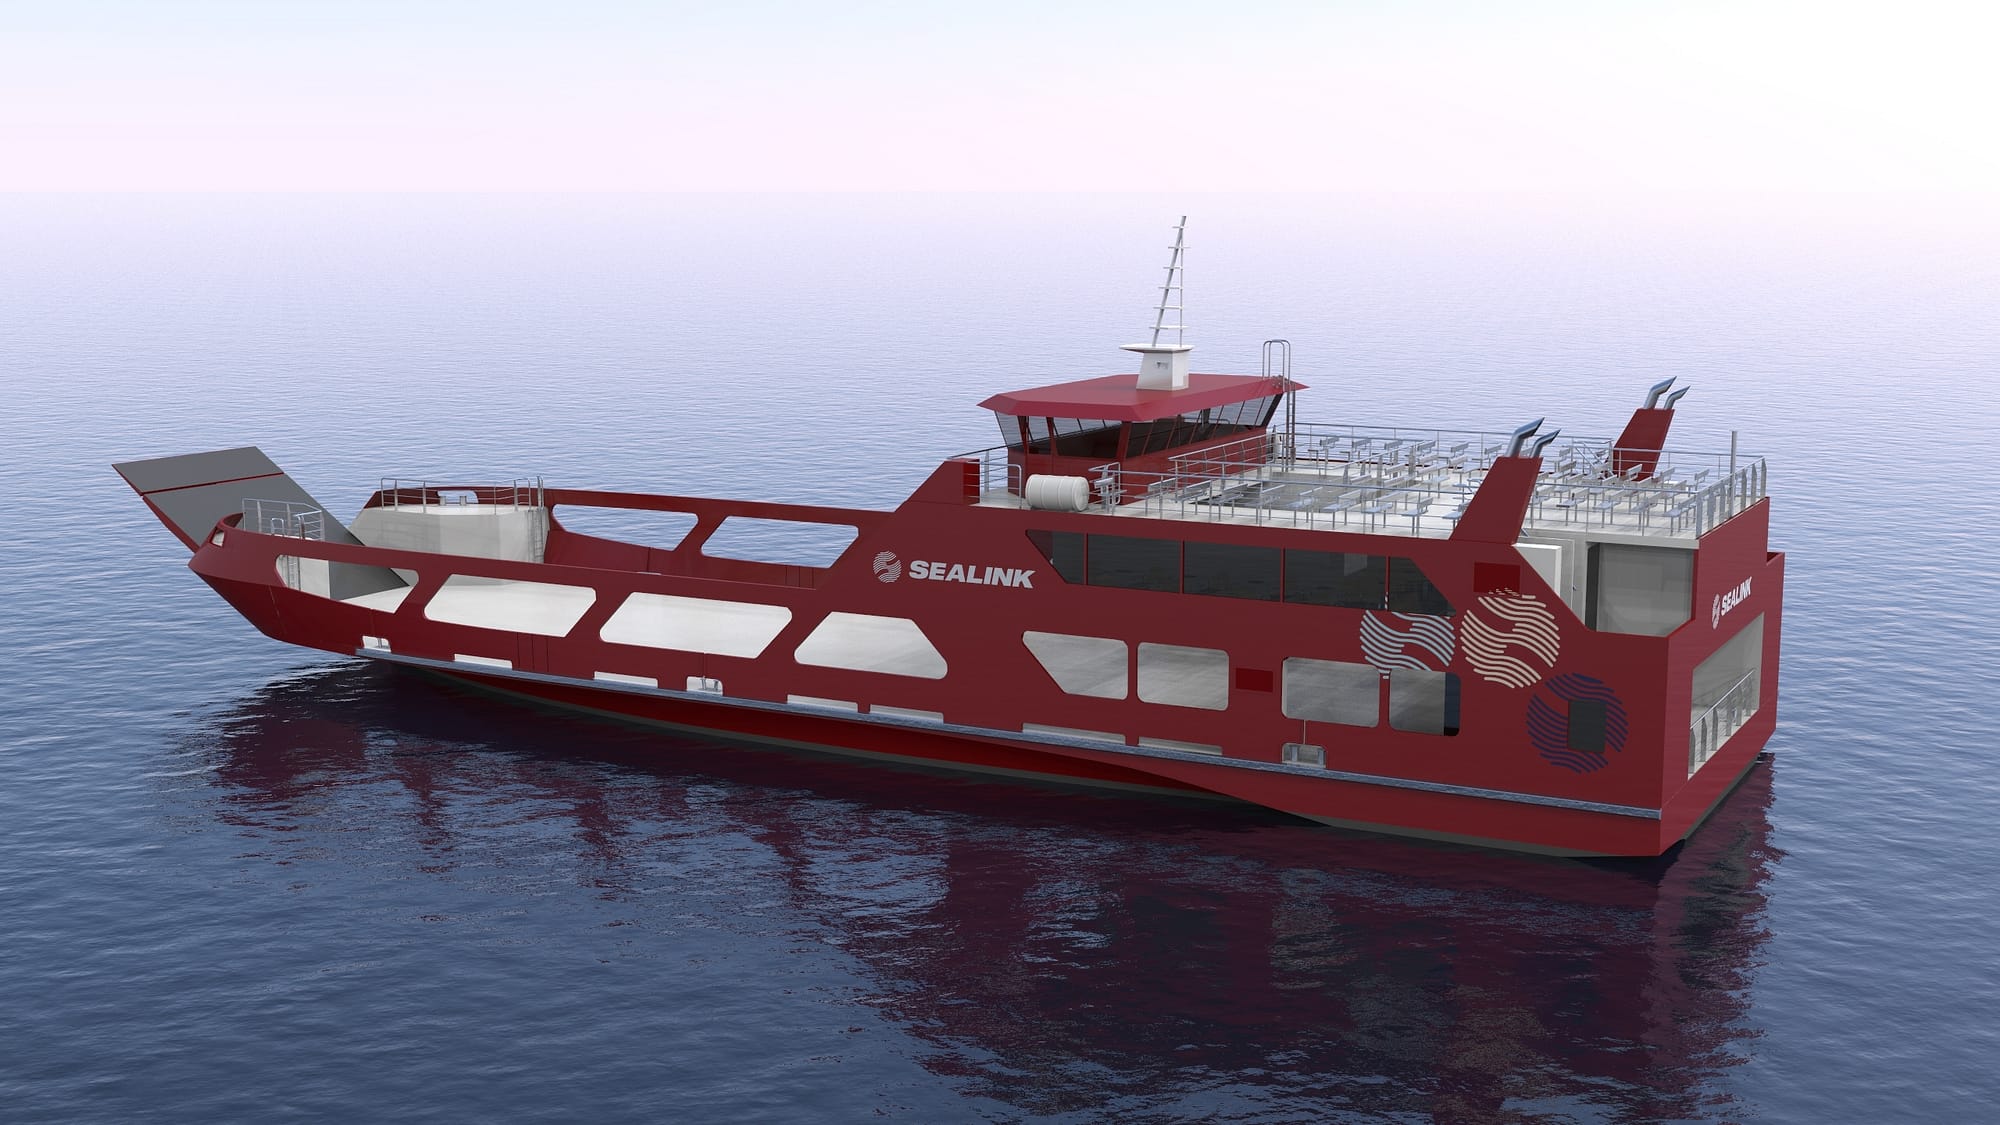 sealink ropax ferry render overall view port aft view